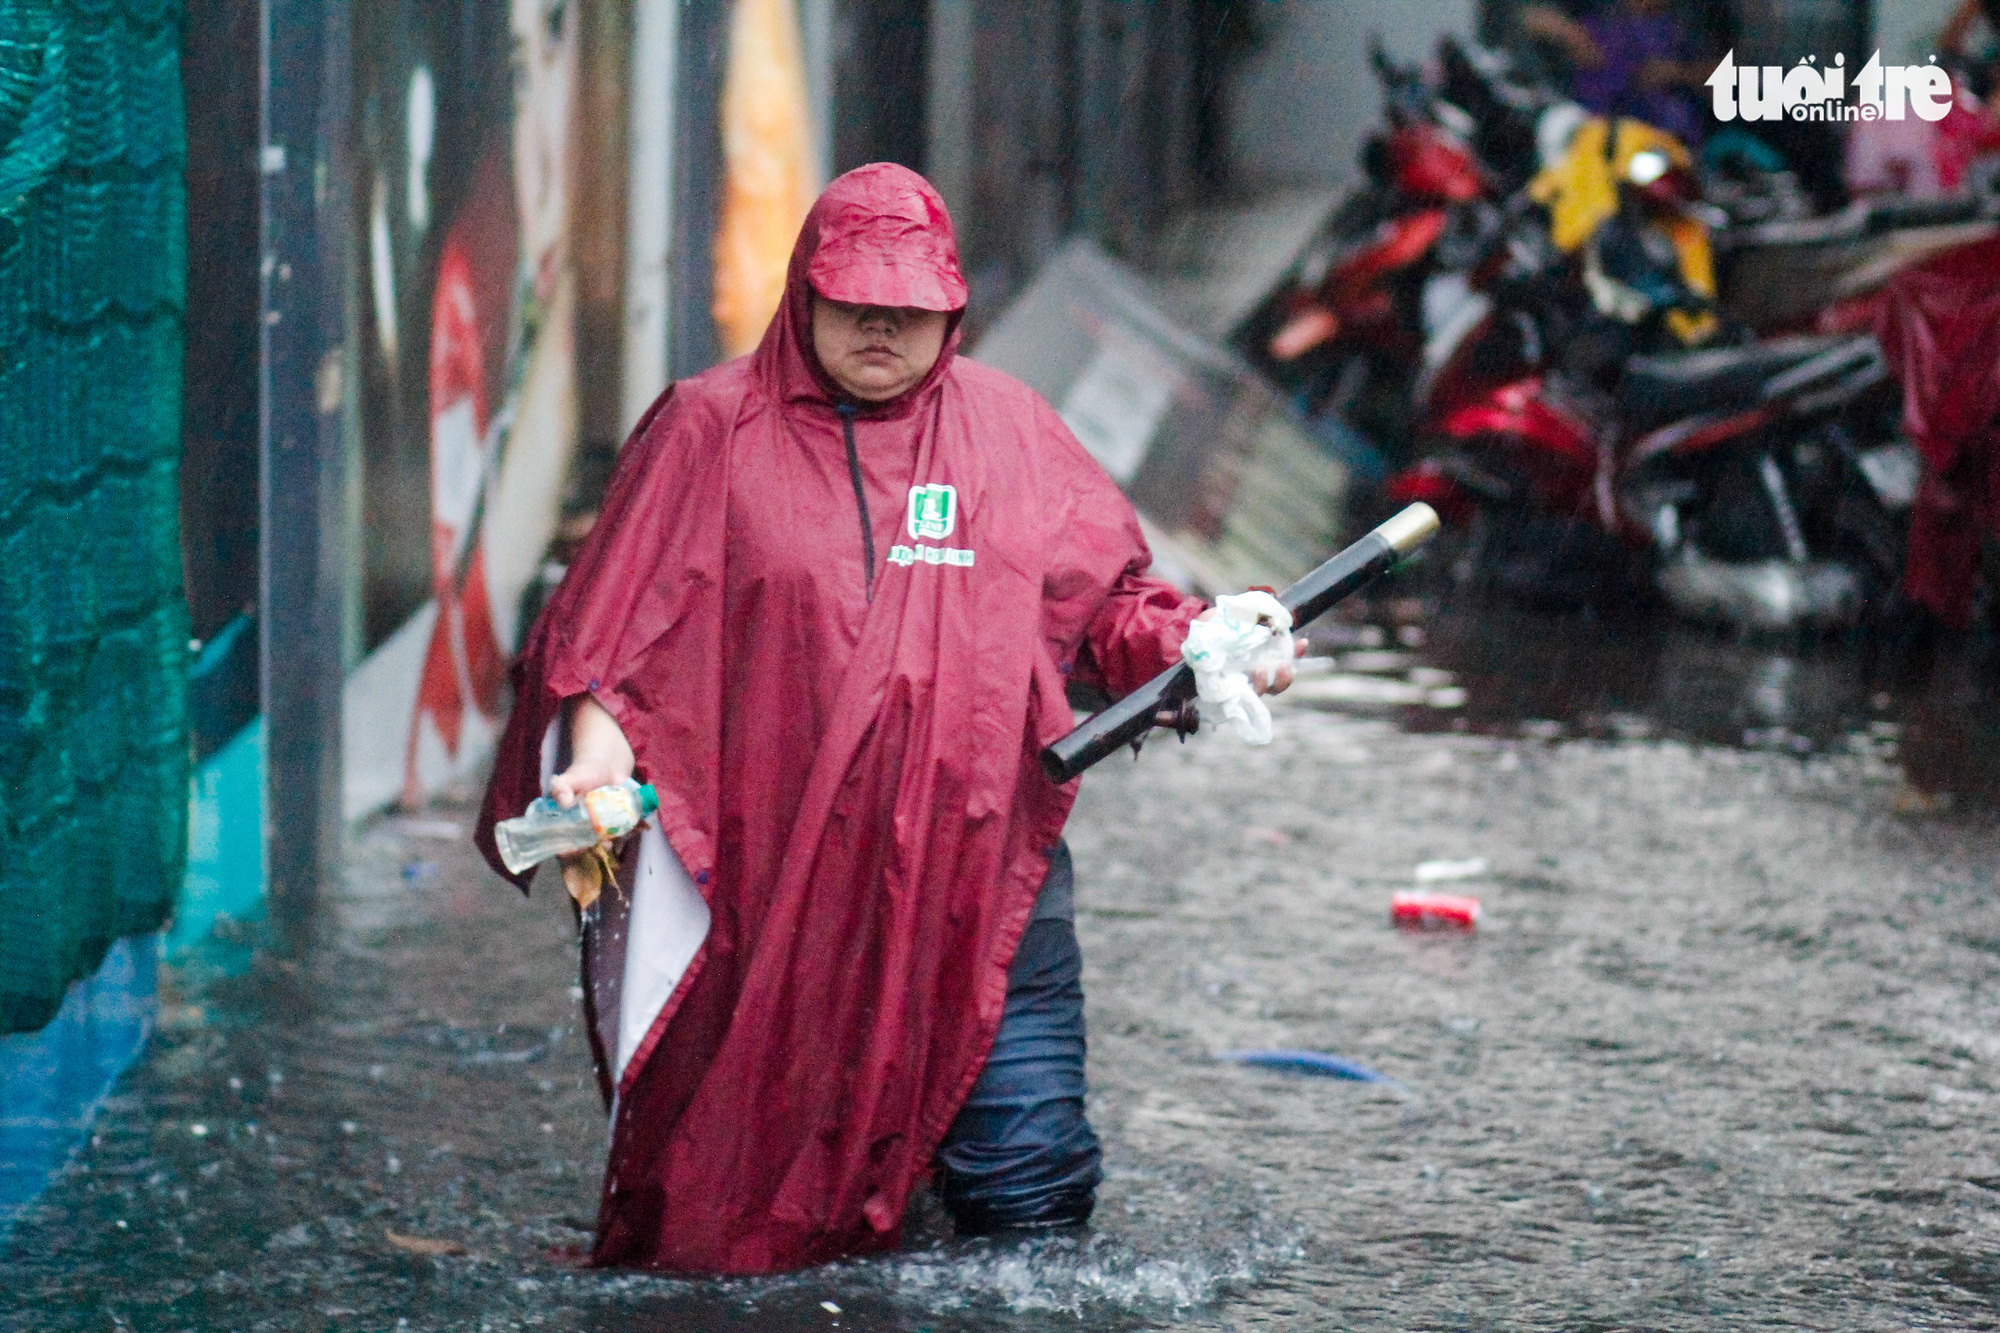 Torrential rain causes flooding in Ho Chi Minh City